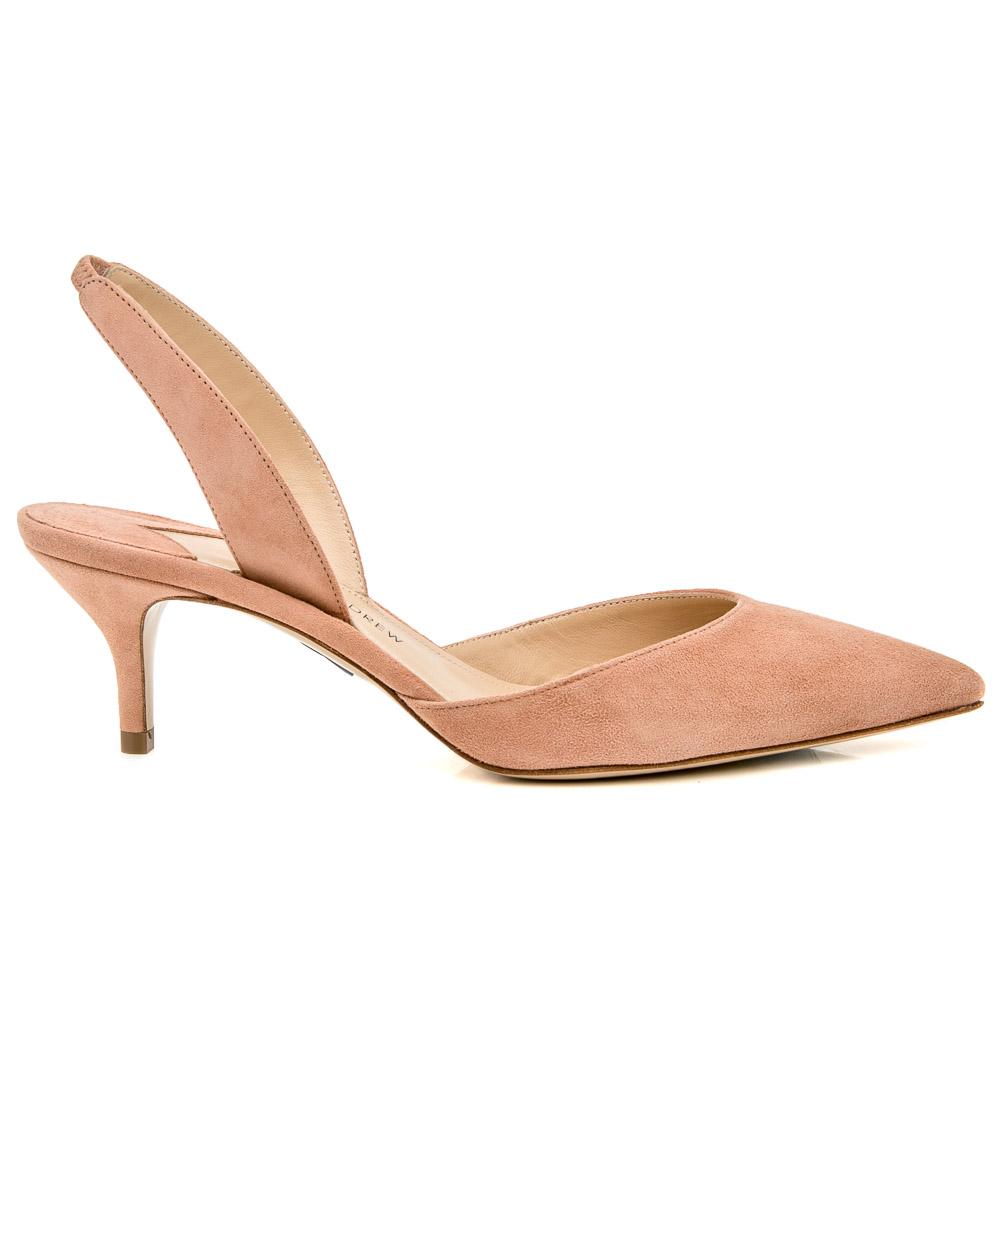 Paul Andrew Suede Blush Rhea Slingback in Pink - Lyst